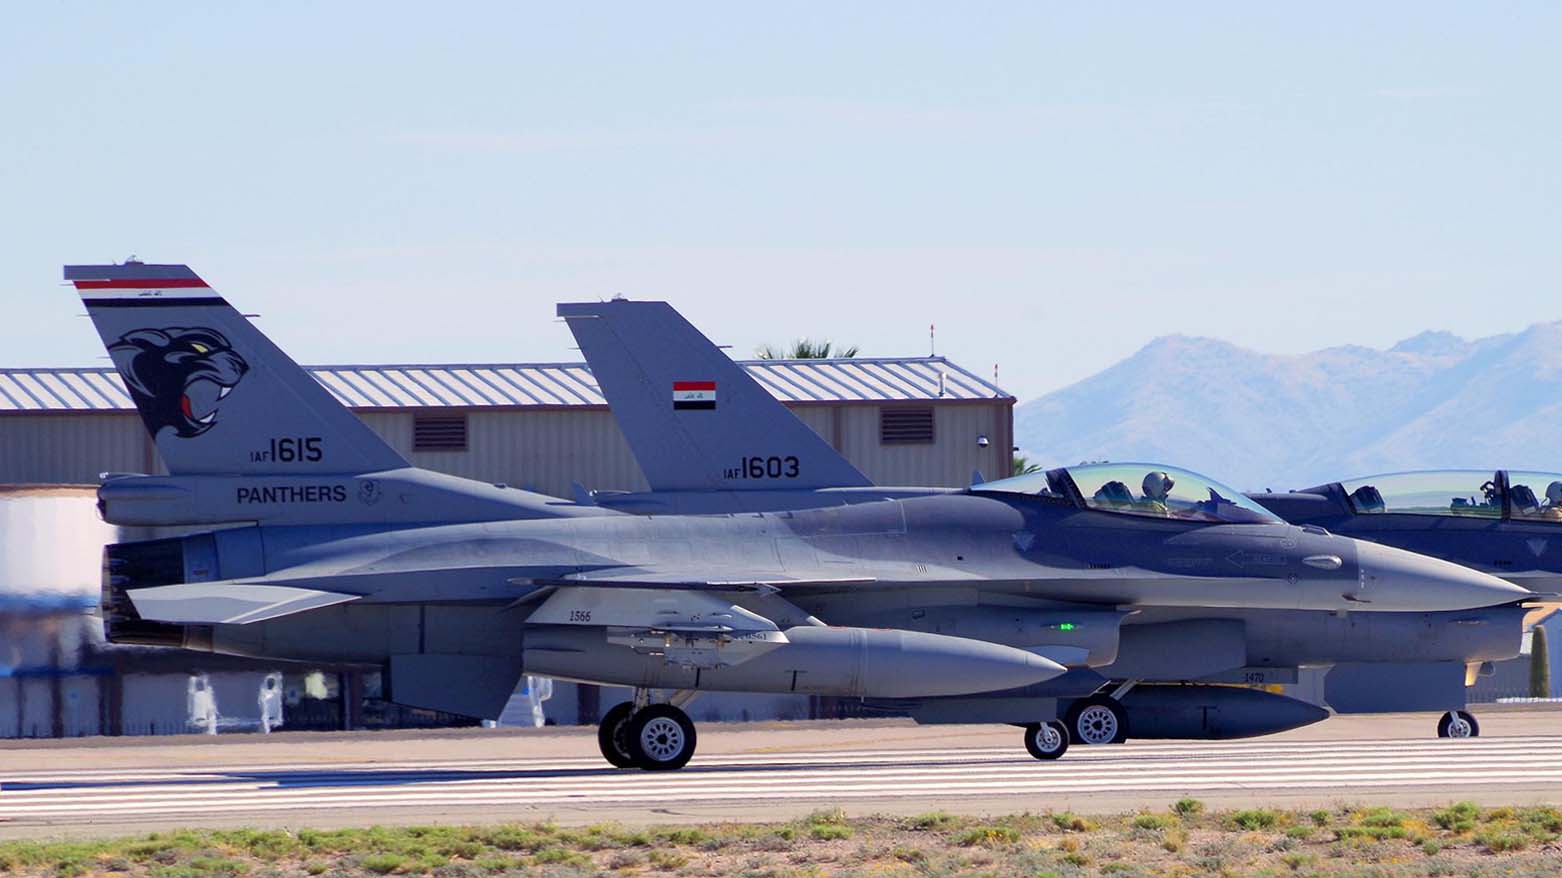 An Iraqi F-16 fighter is pictured at a base prior to taking off. (Photo: ABPic)